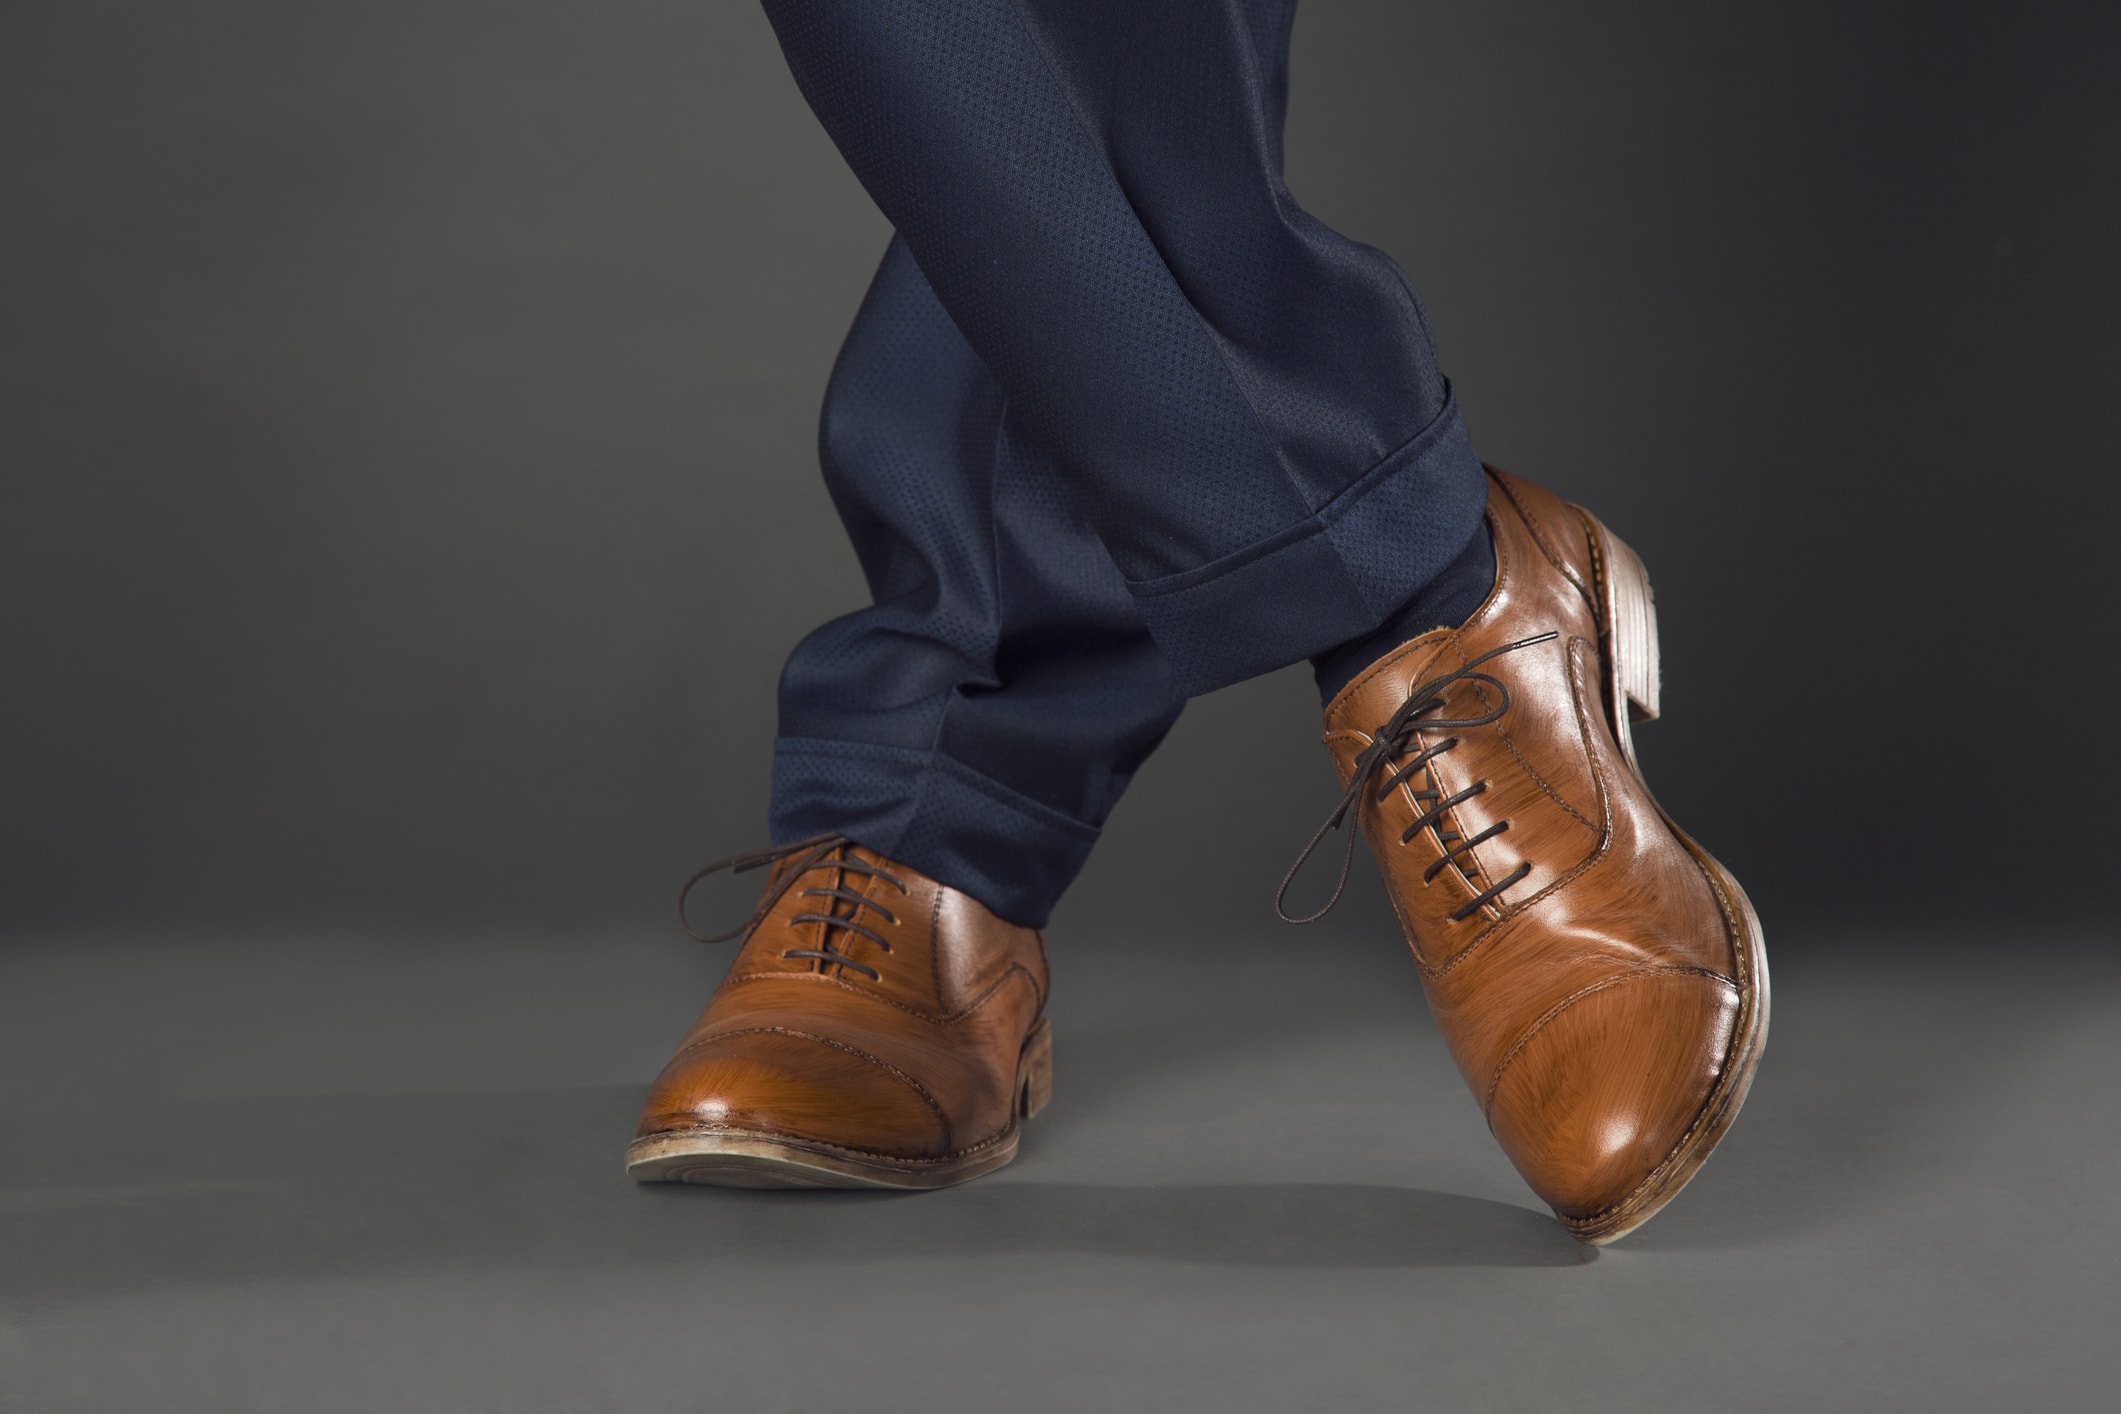 best place for cheap dress shoes